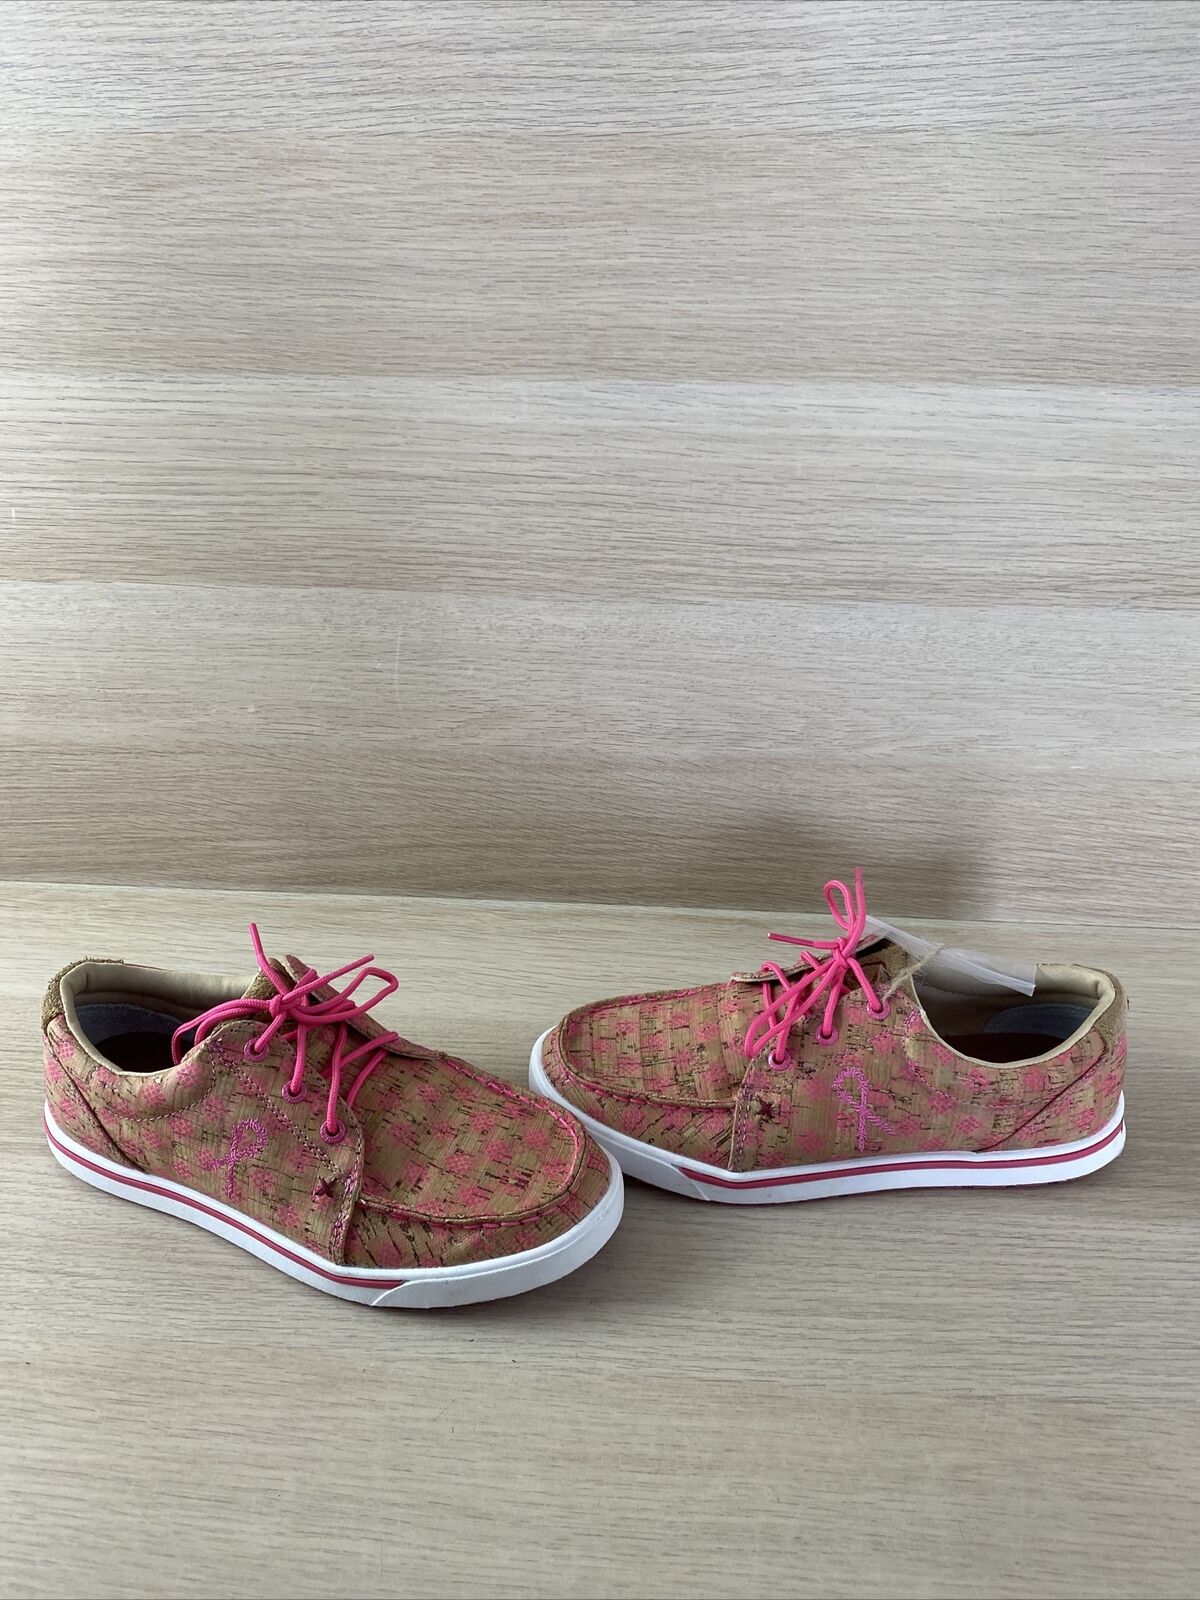 Twisted X Cork/Pink Lace Up Moc Toe Casual Shoes Women’s Size 8 M